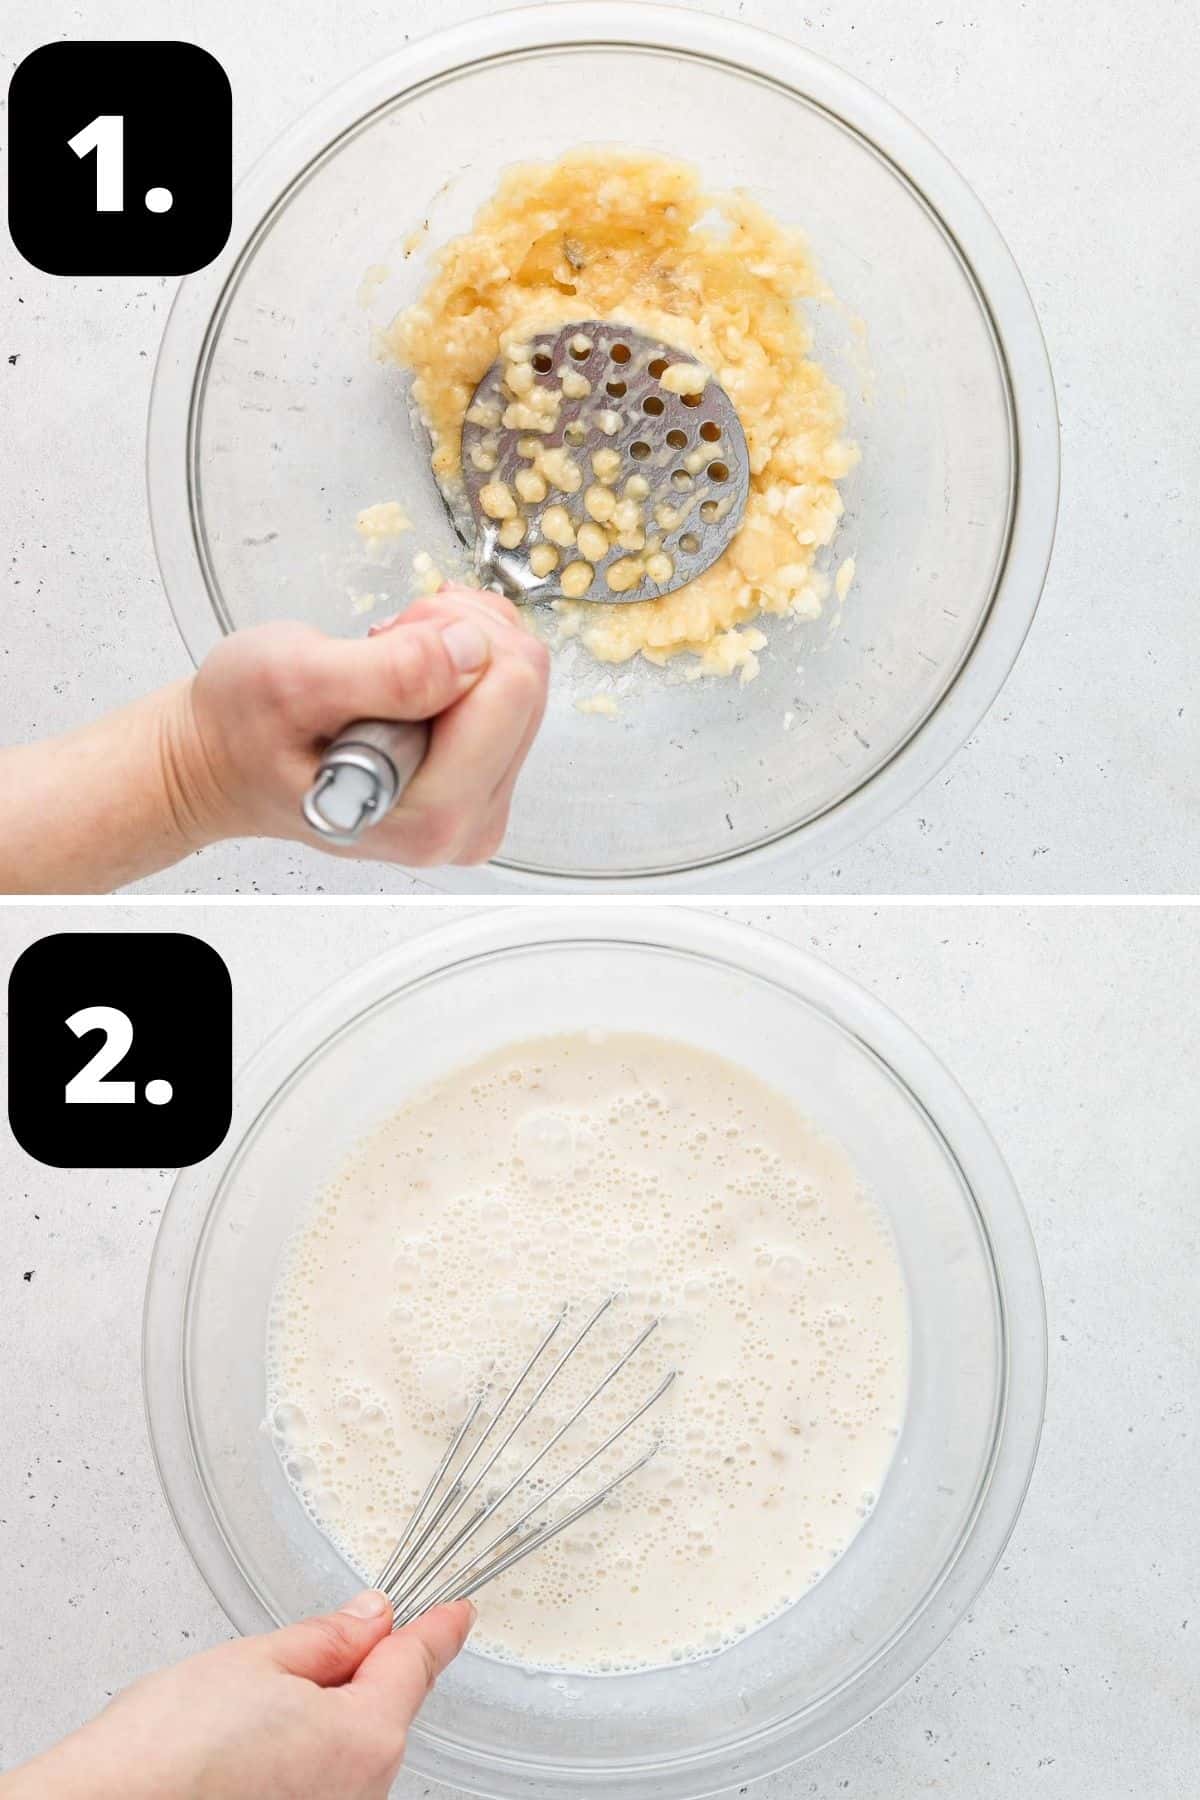 Steps 1-2 of preparing this recipe - mashing the banana in a glass bowl and mixing in the milk.